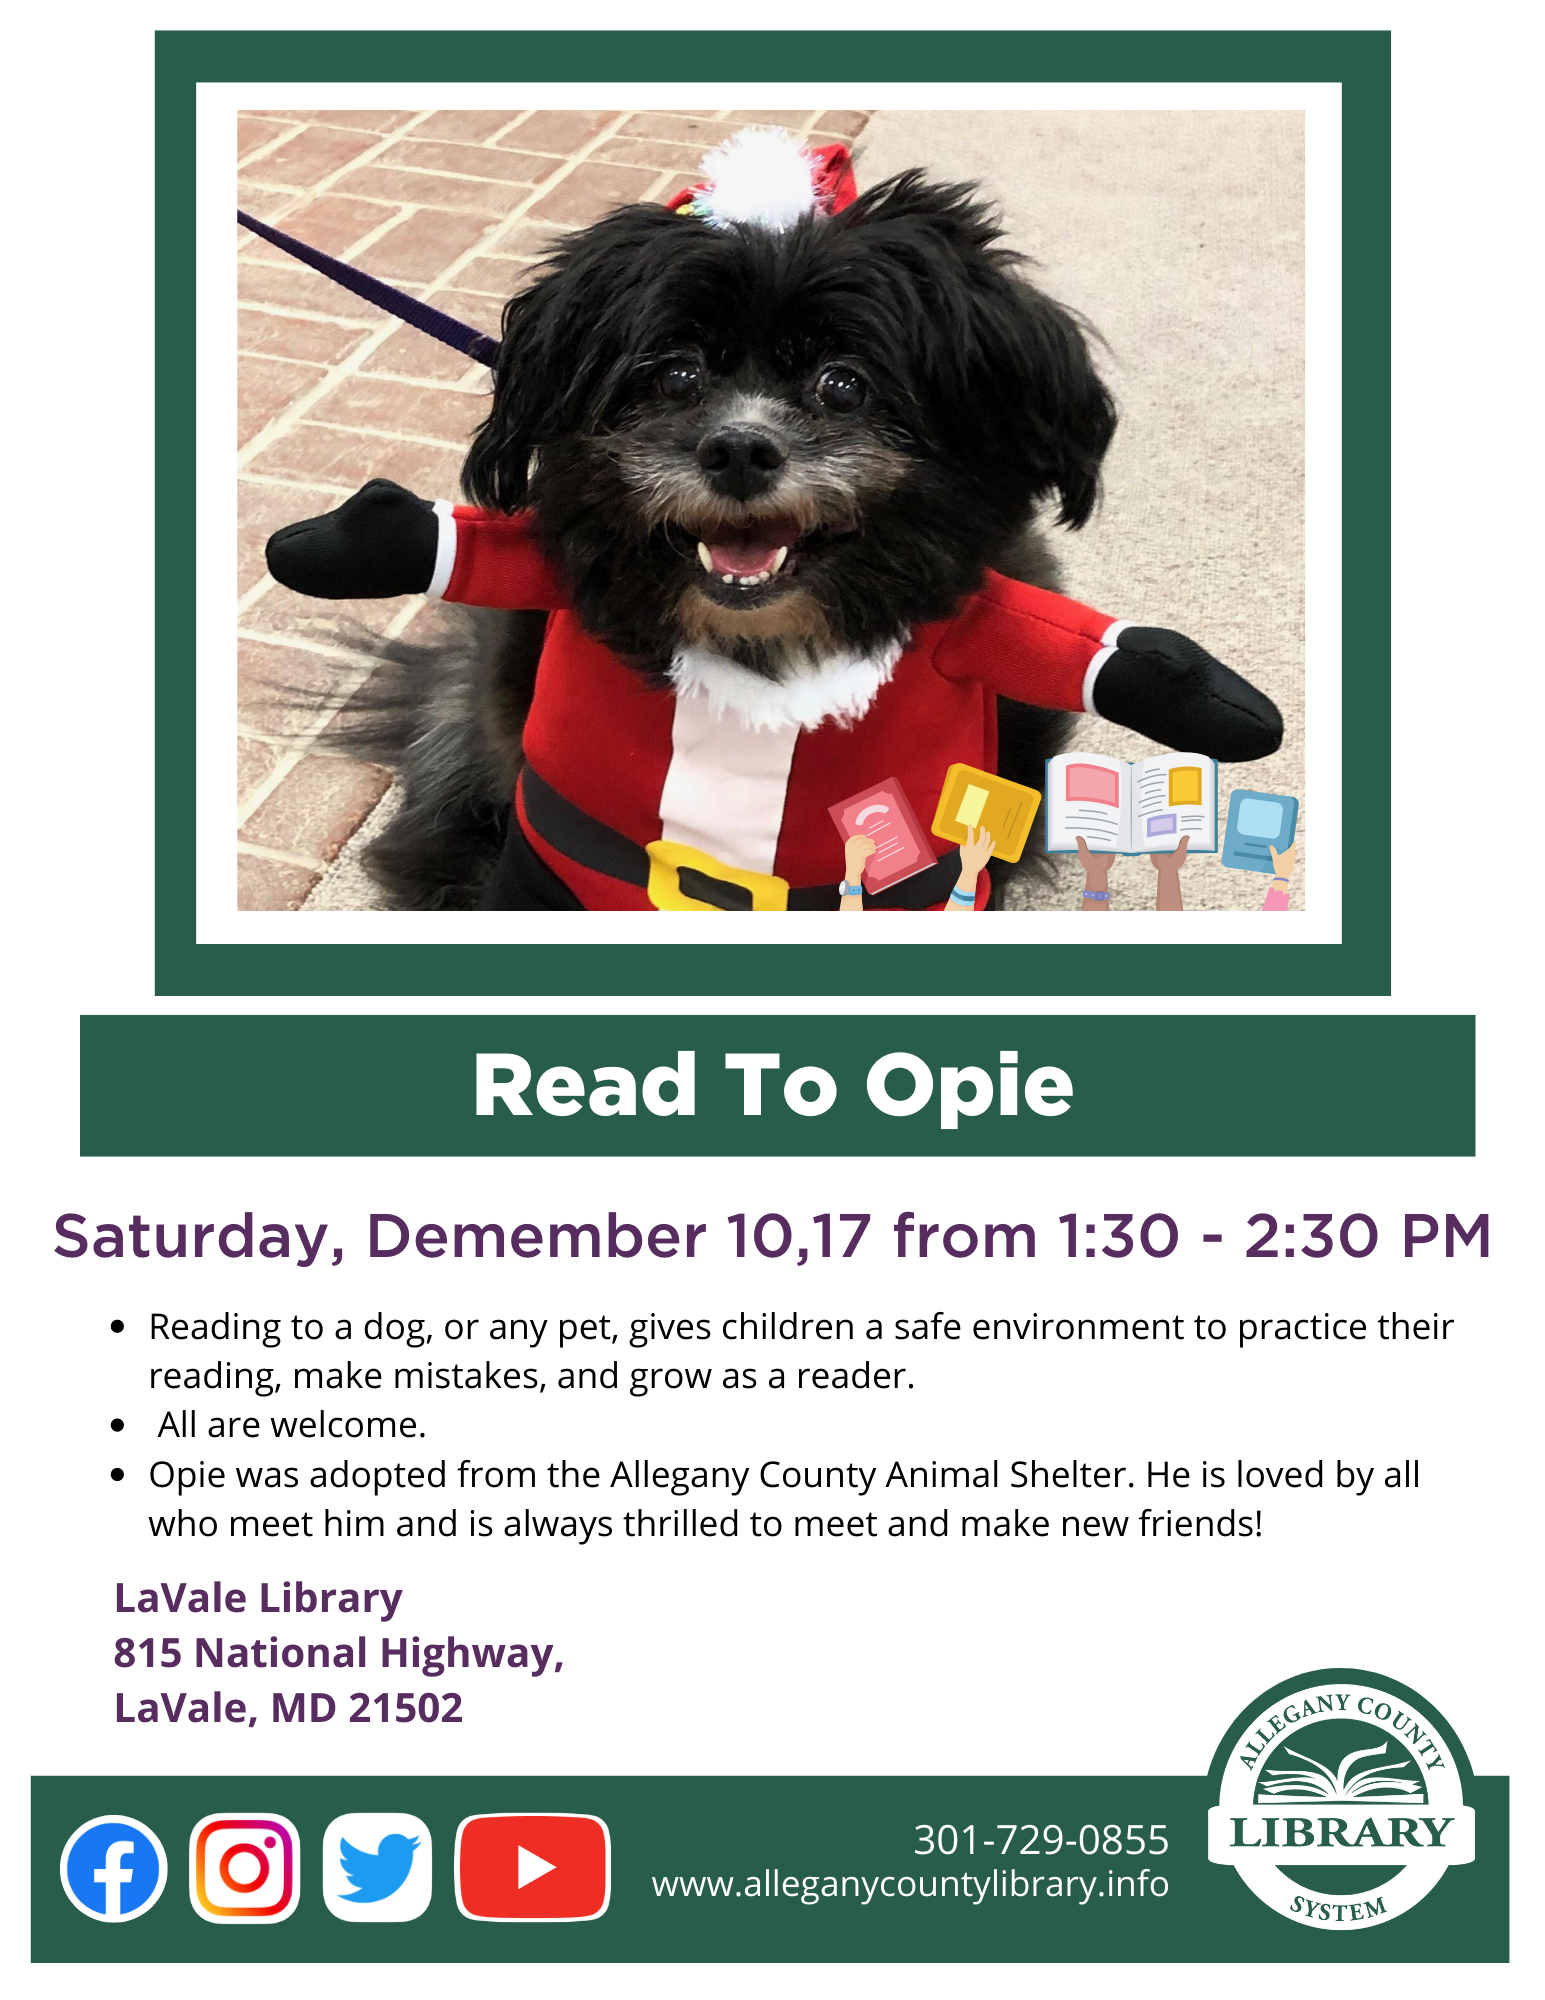 Opie in a Santa costume with event details